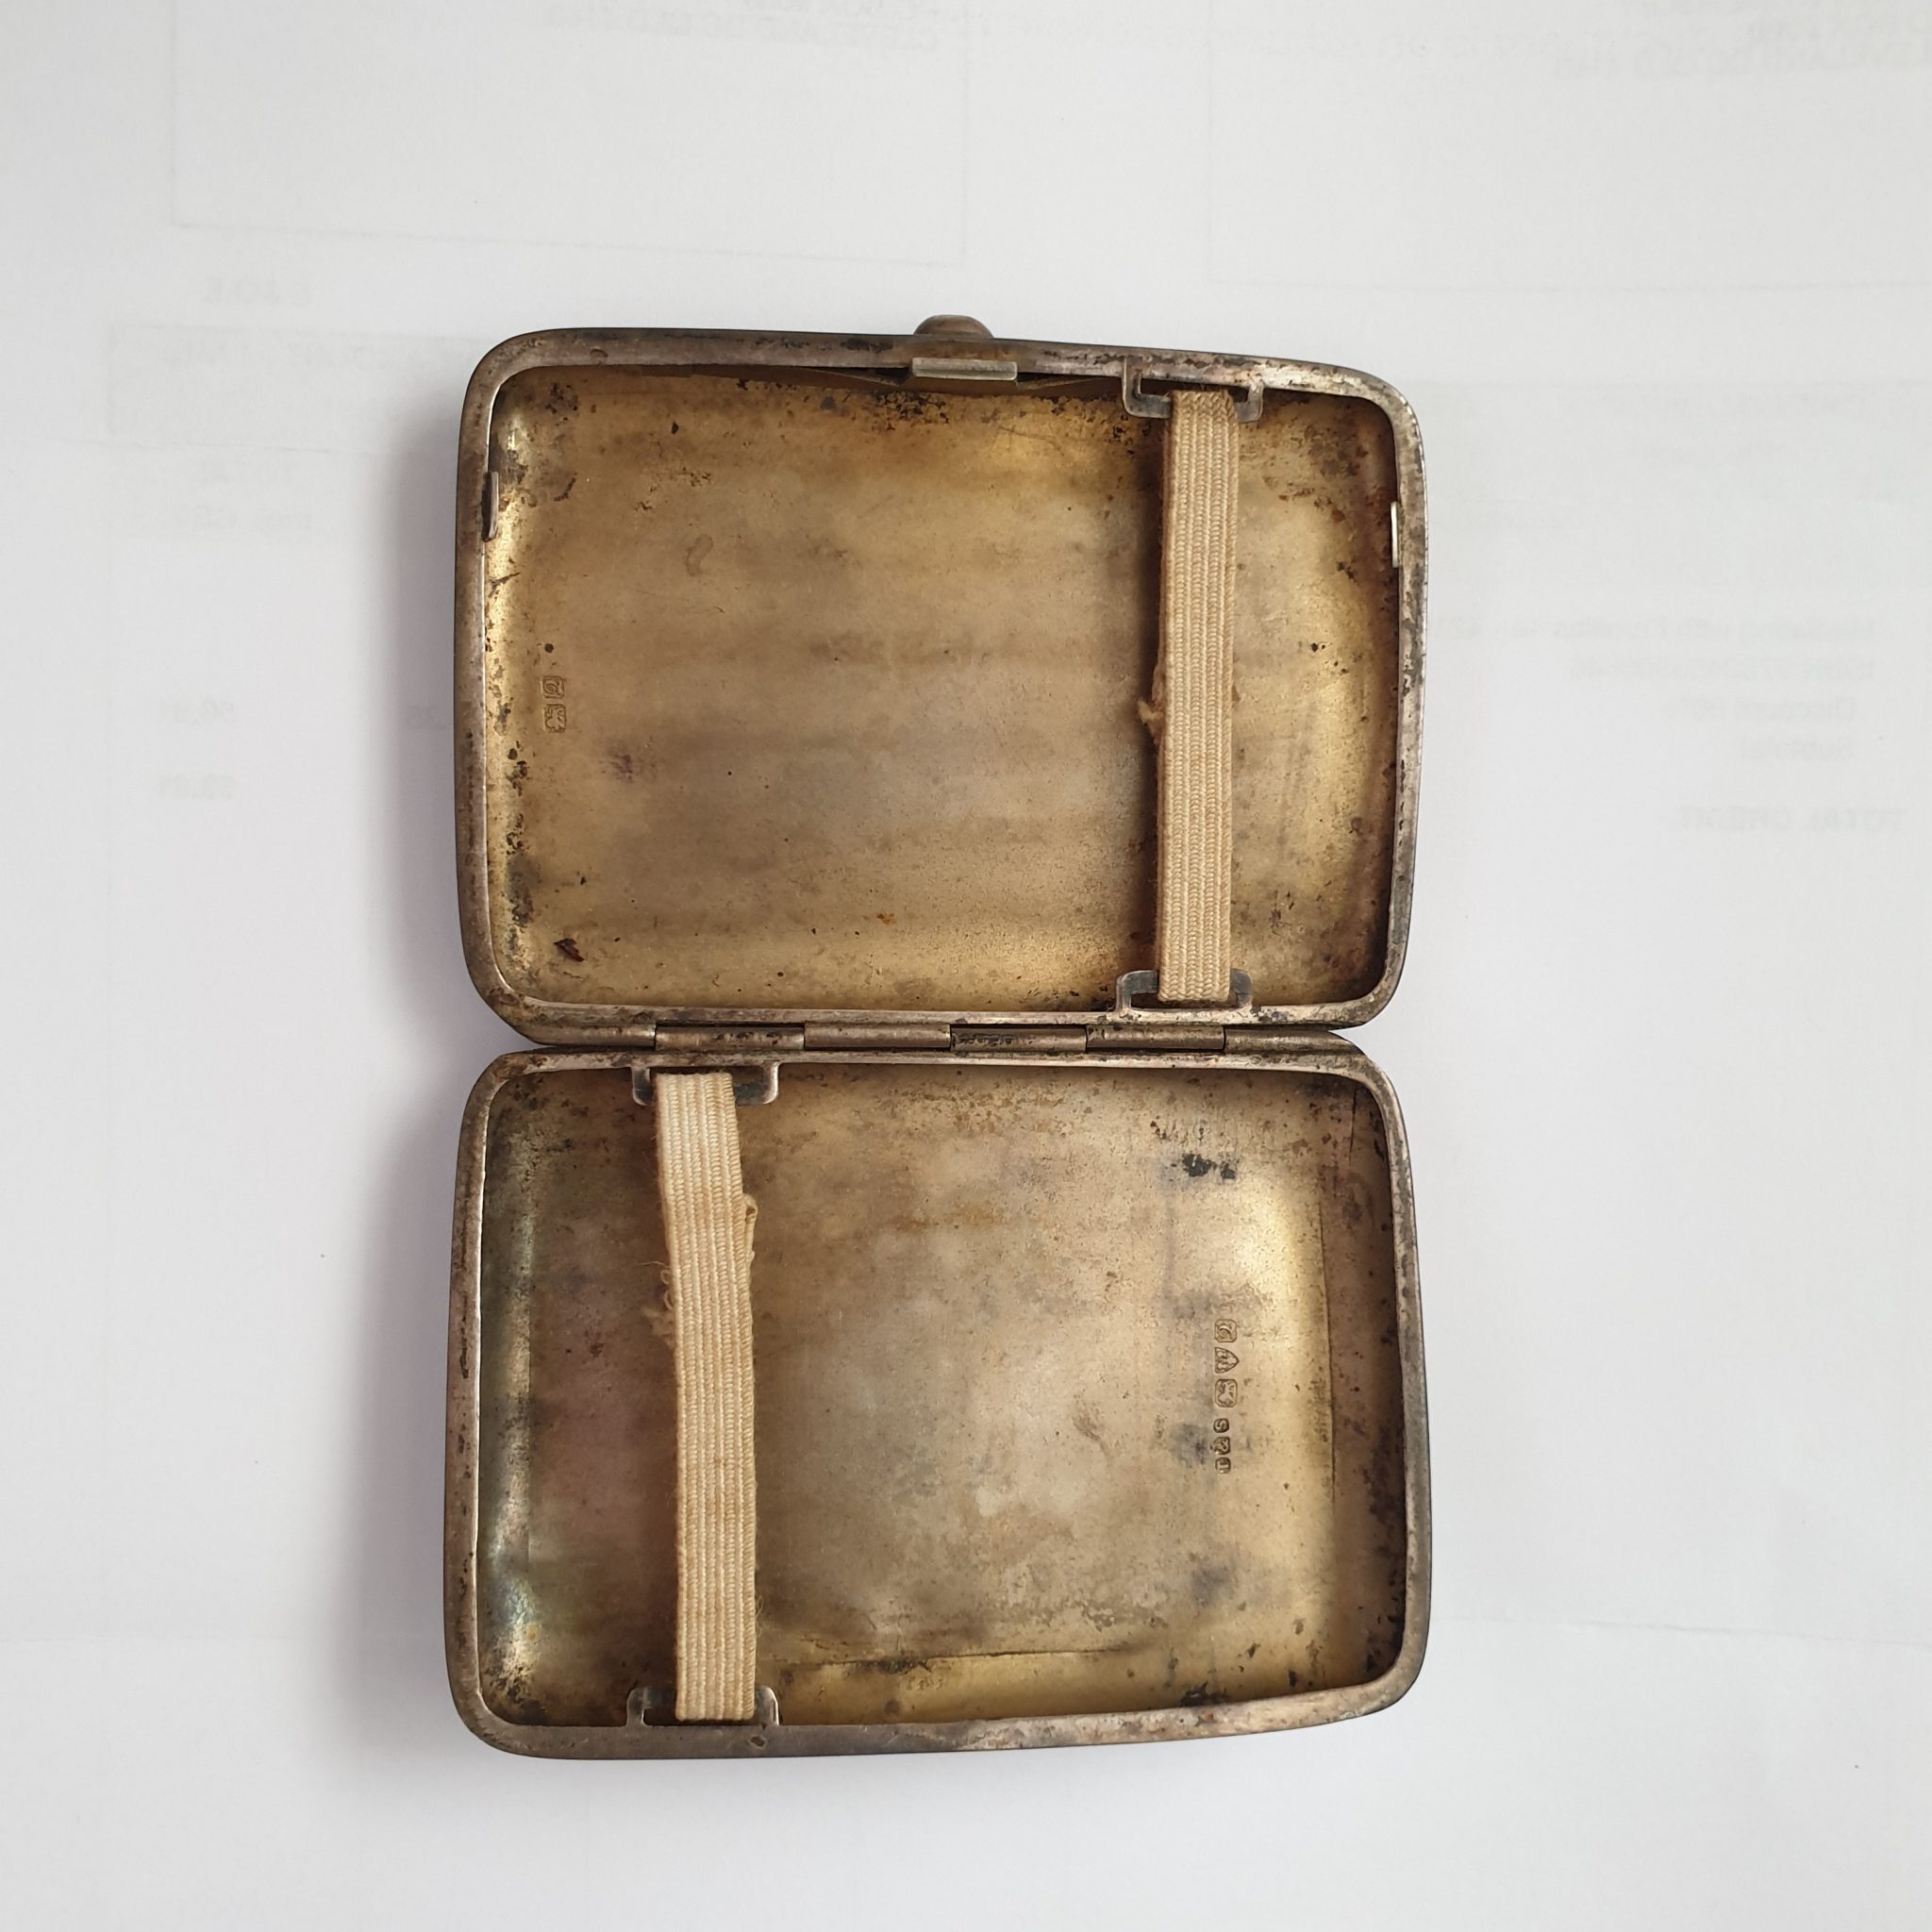 The inside of a cigarette case from 1918.